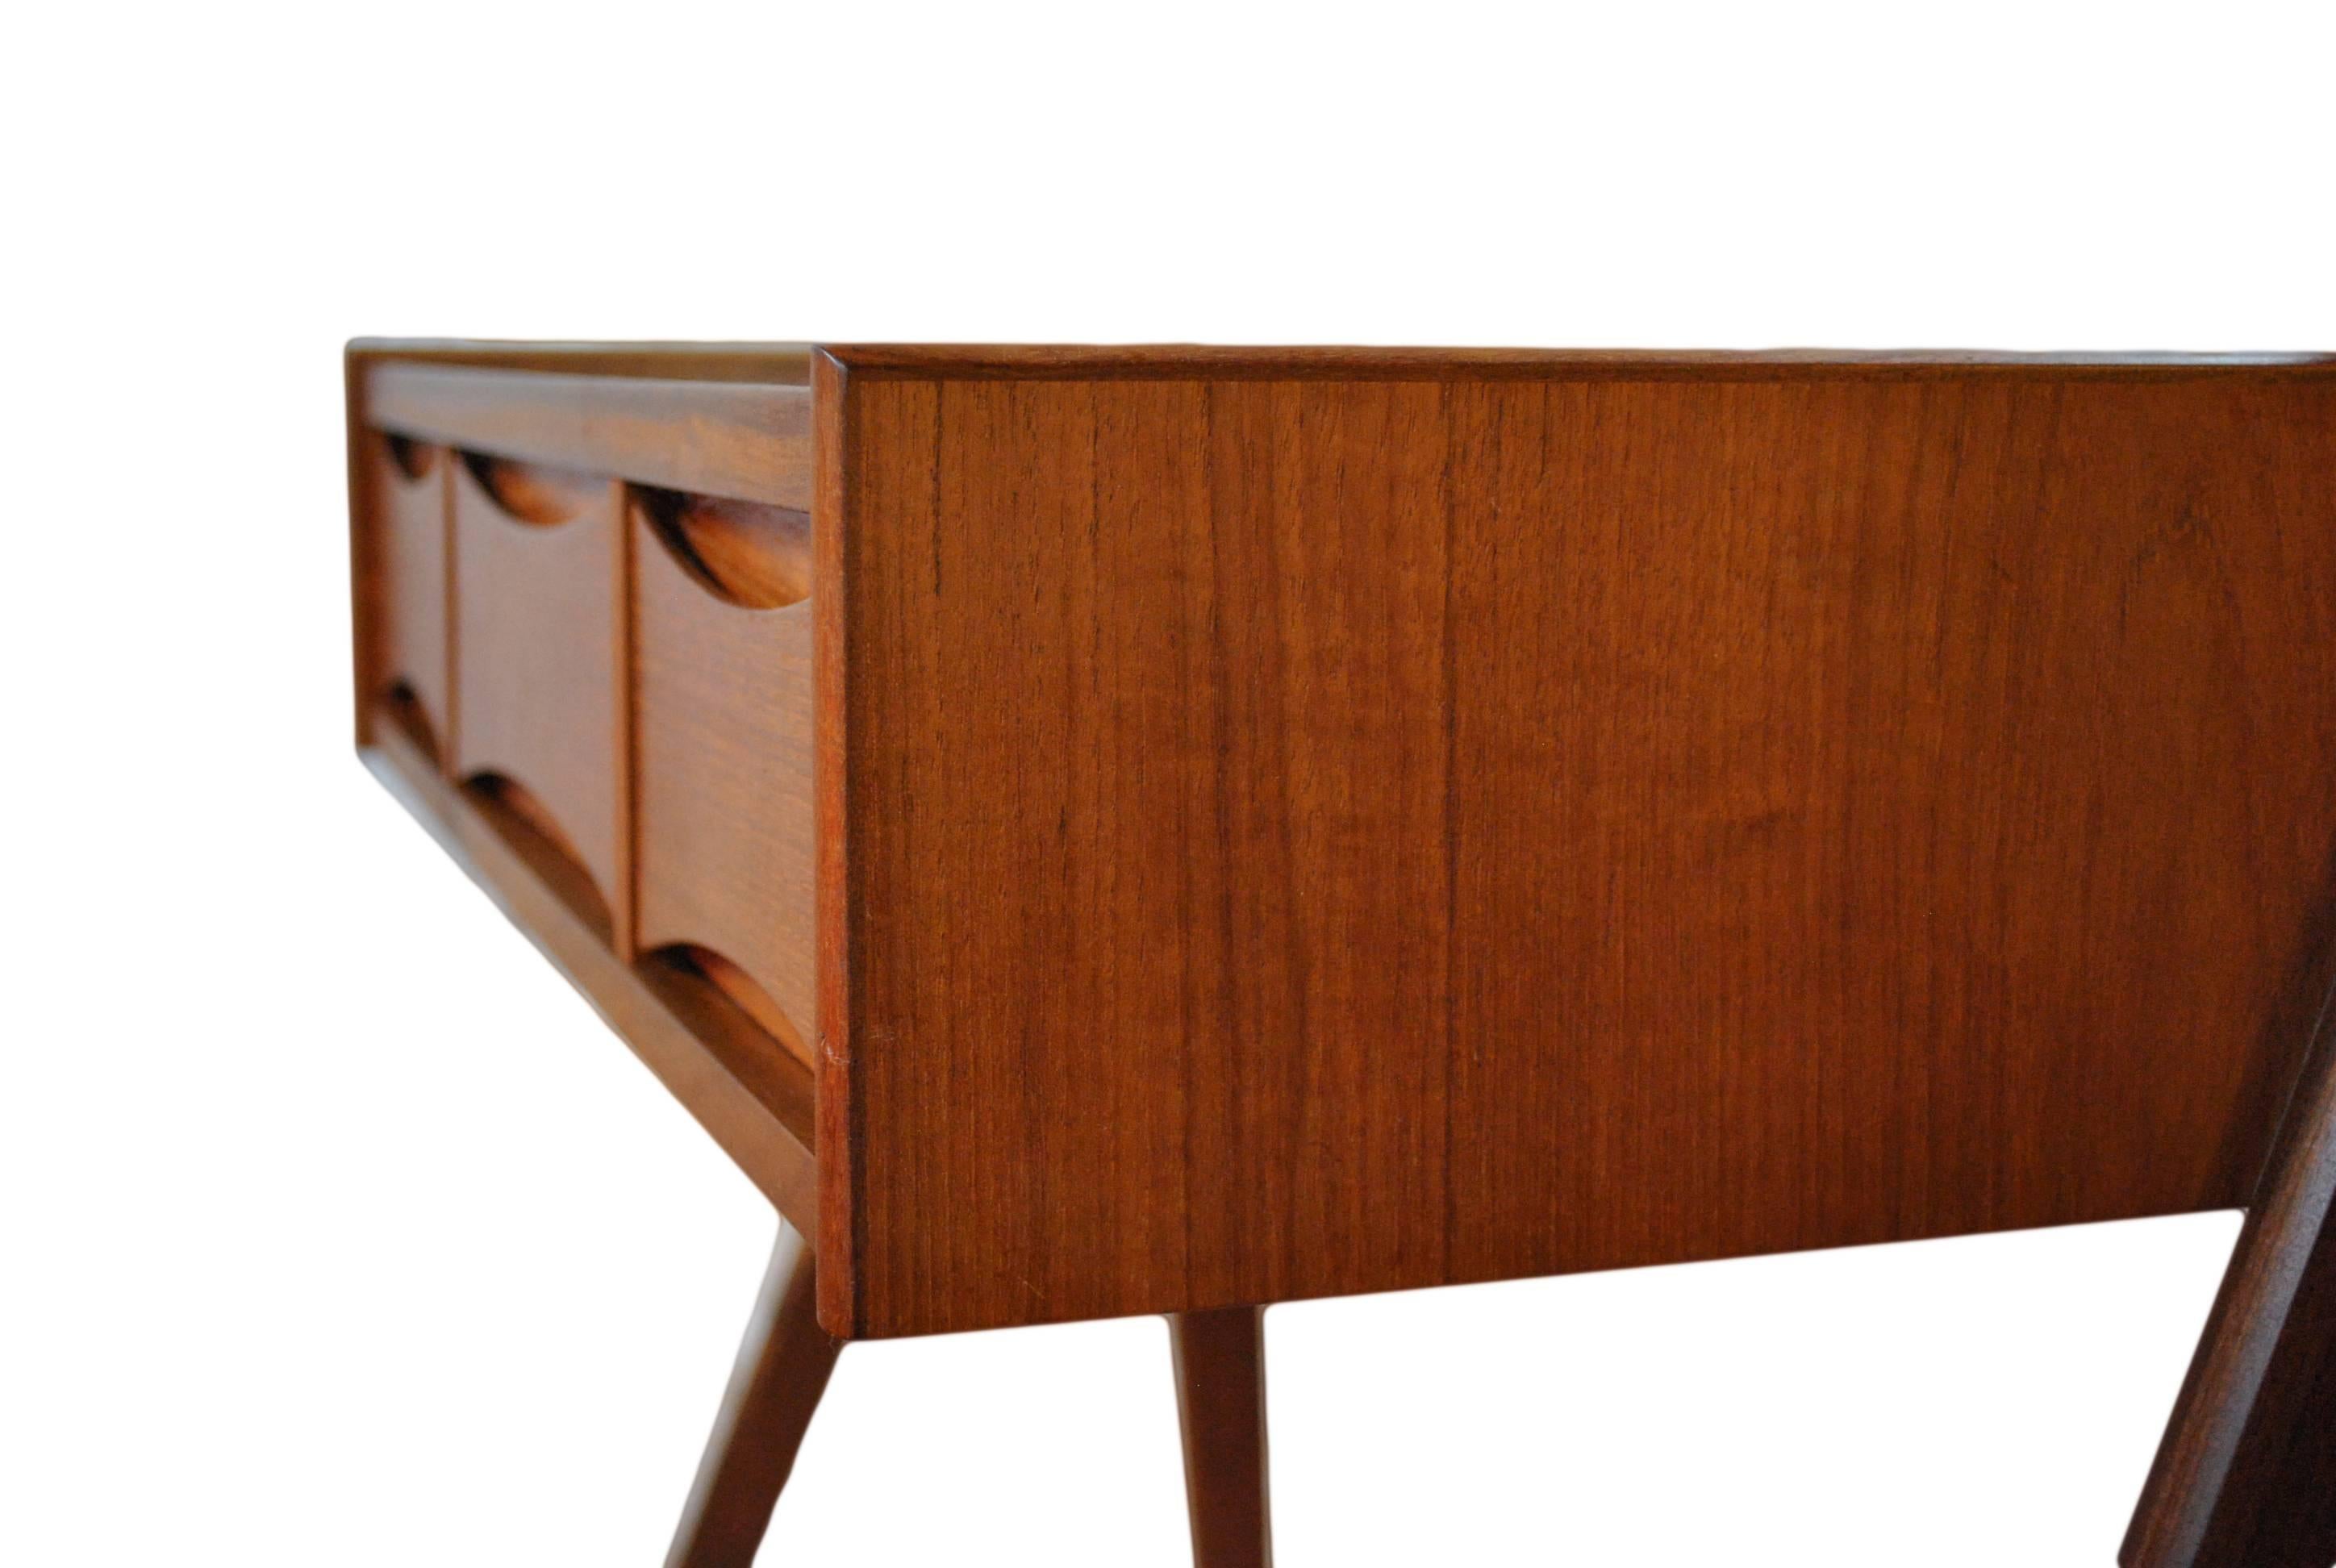 A rare piece designed by Arne Vodder, circa 1960, Denmark. Constructed in teak with a swivel mirror, black glass work surface and Vodders Classic bow tie drawer fronts.
This item is in fantastic vintage condition and dismantles easily for safe